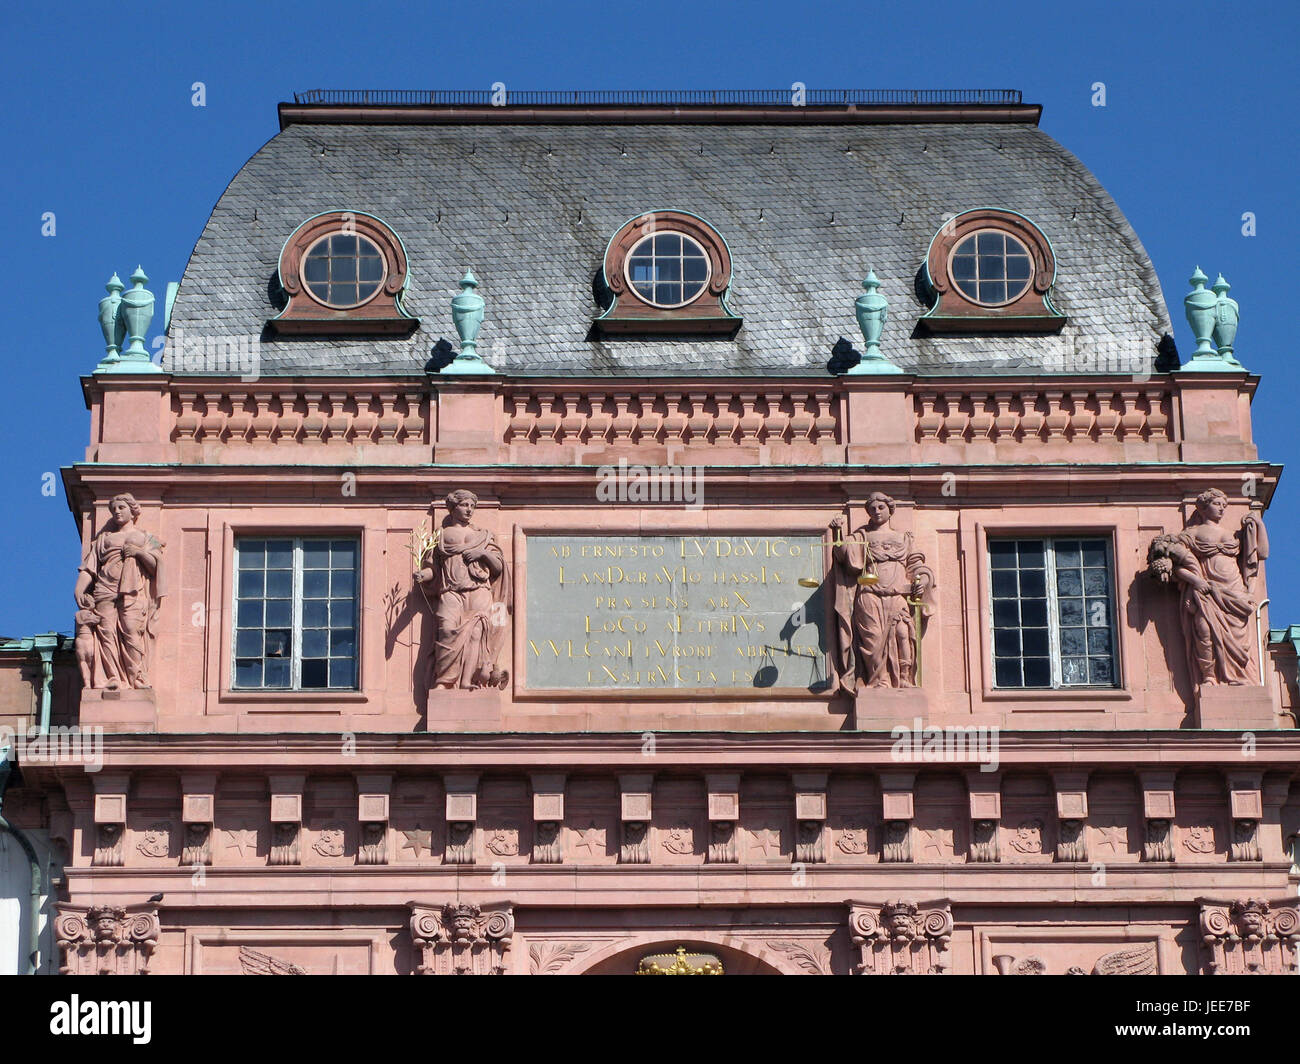 Germany, Hessen, Darmstadt, lock, facade, lock facade, detail, statues, buildings, red, roof, window, outside, inscription, colour, gold, Stock Photo